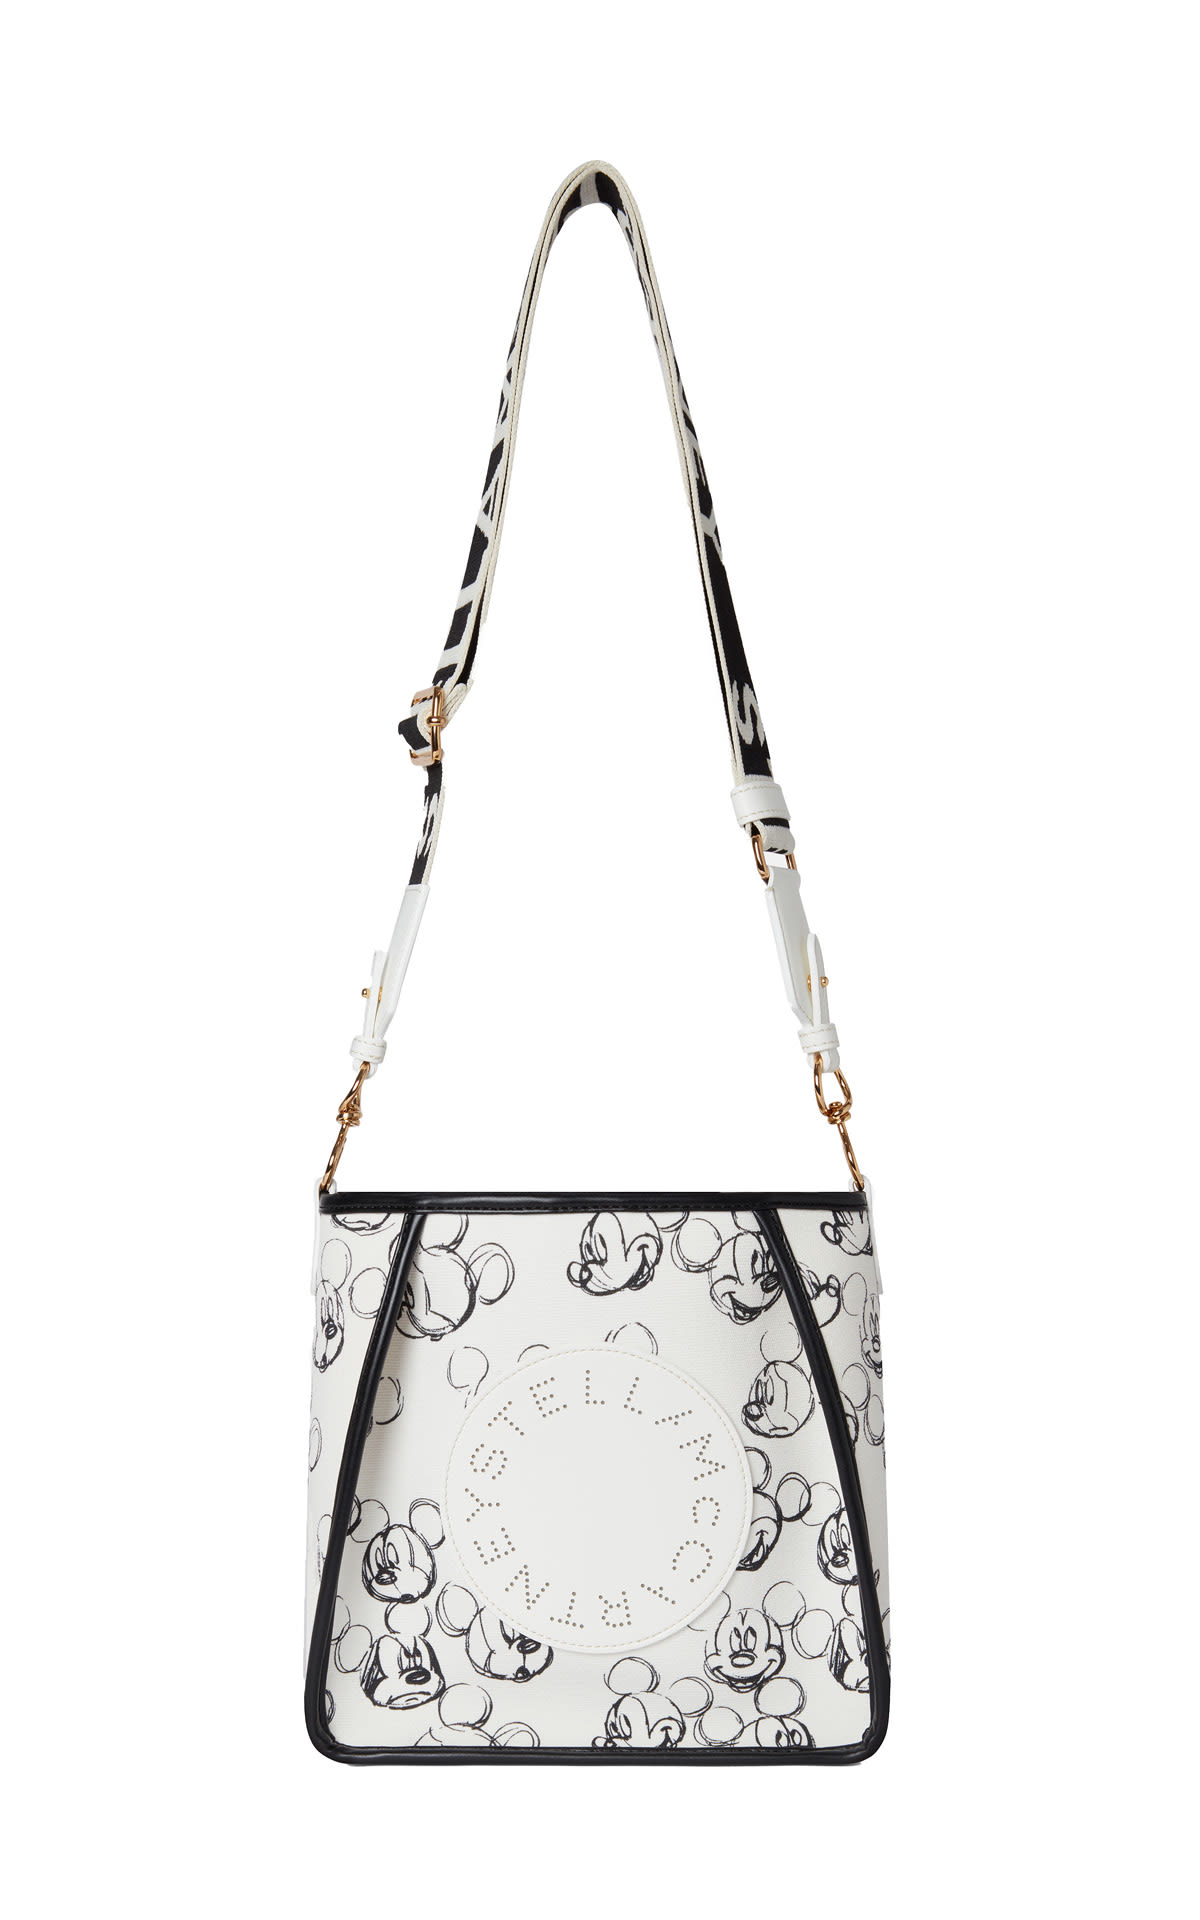 Stella McCartney  Crossbody bag with print for Disney Fantasia of Mickey Mouse